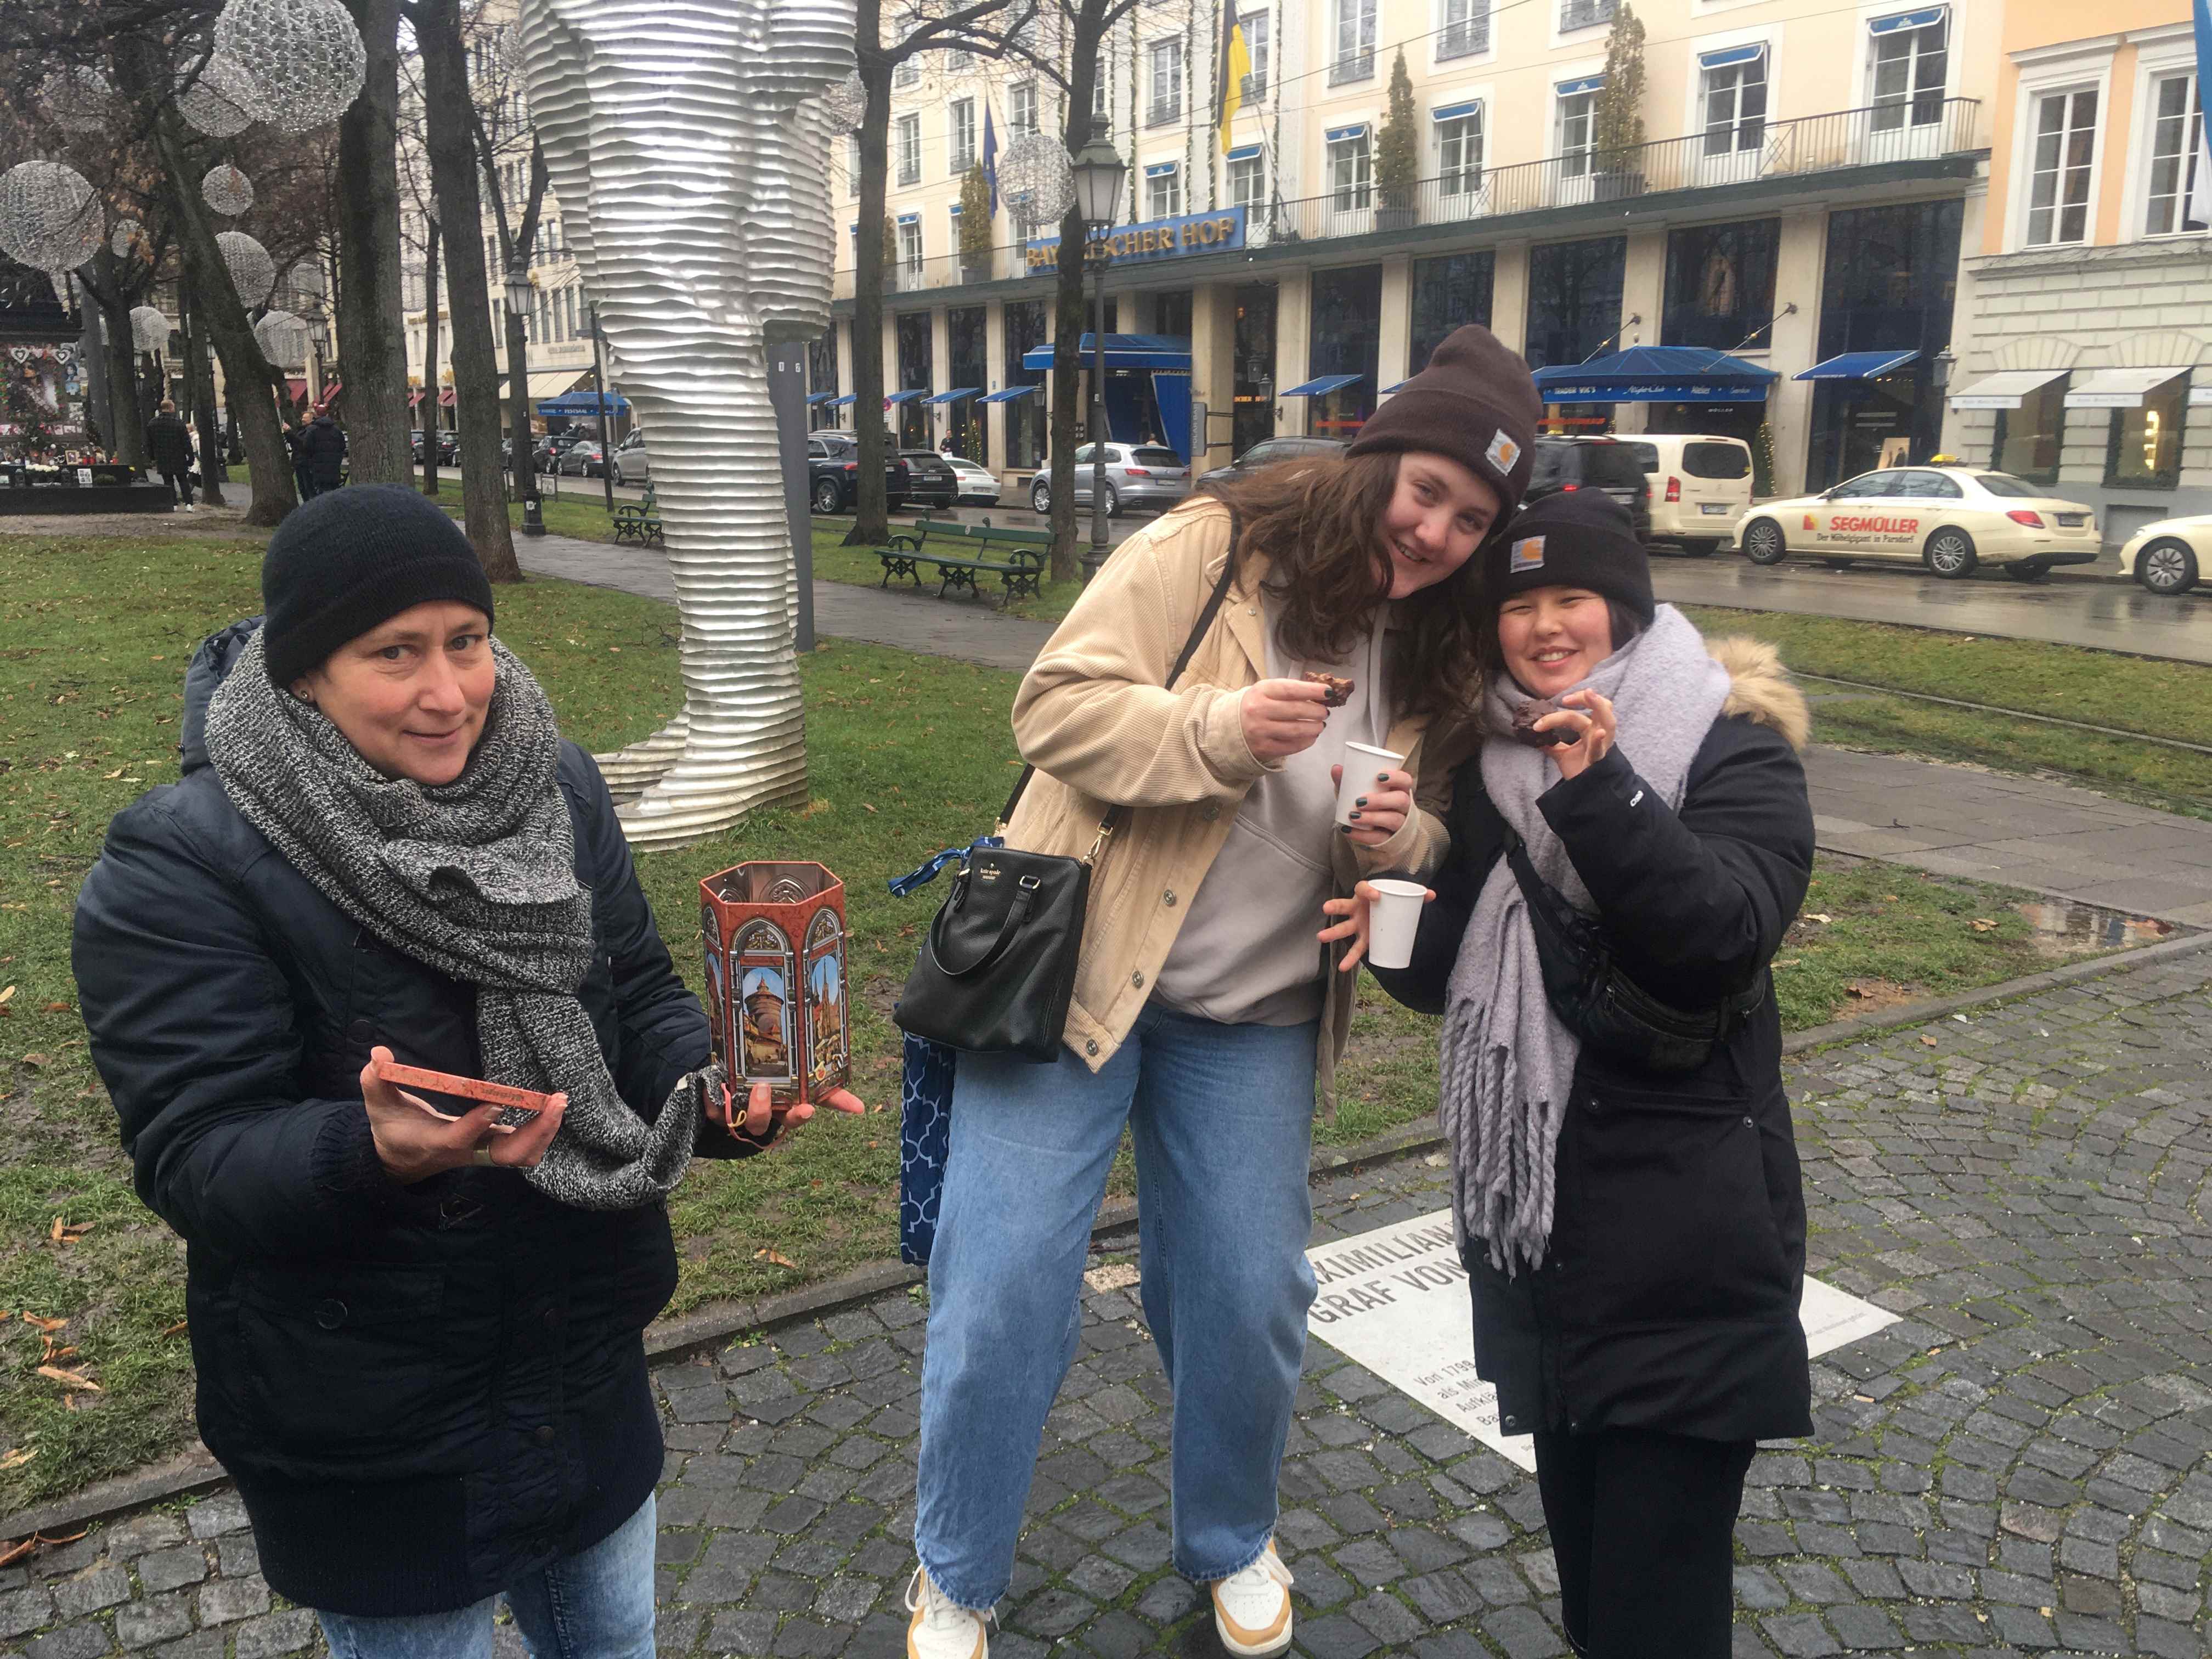 Offering students some of her homemade Lebkuchen on a tour of Advent traditions in Munich